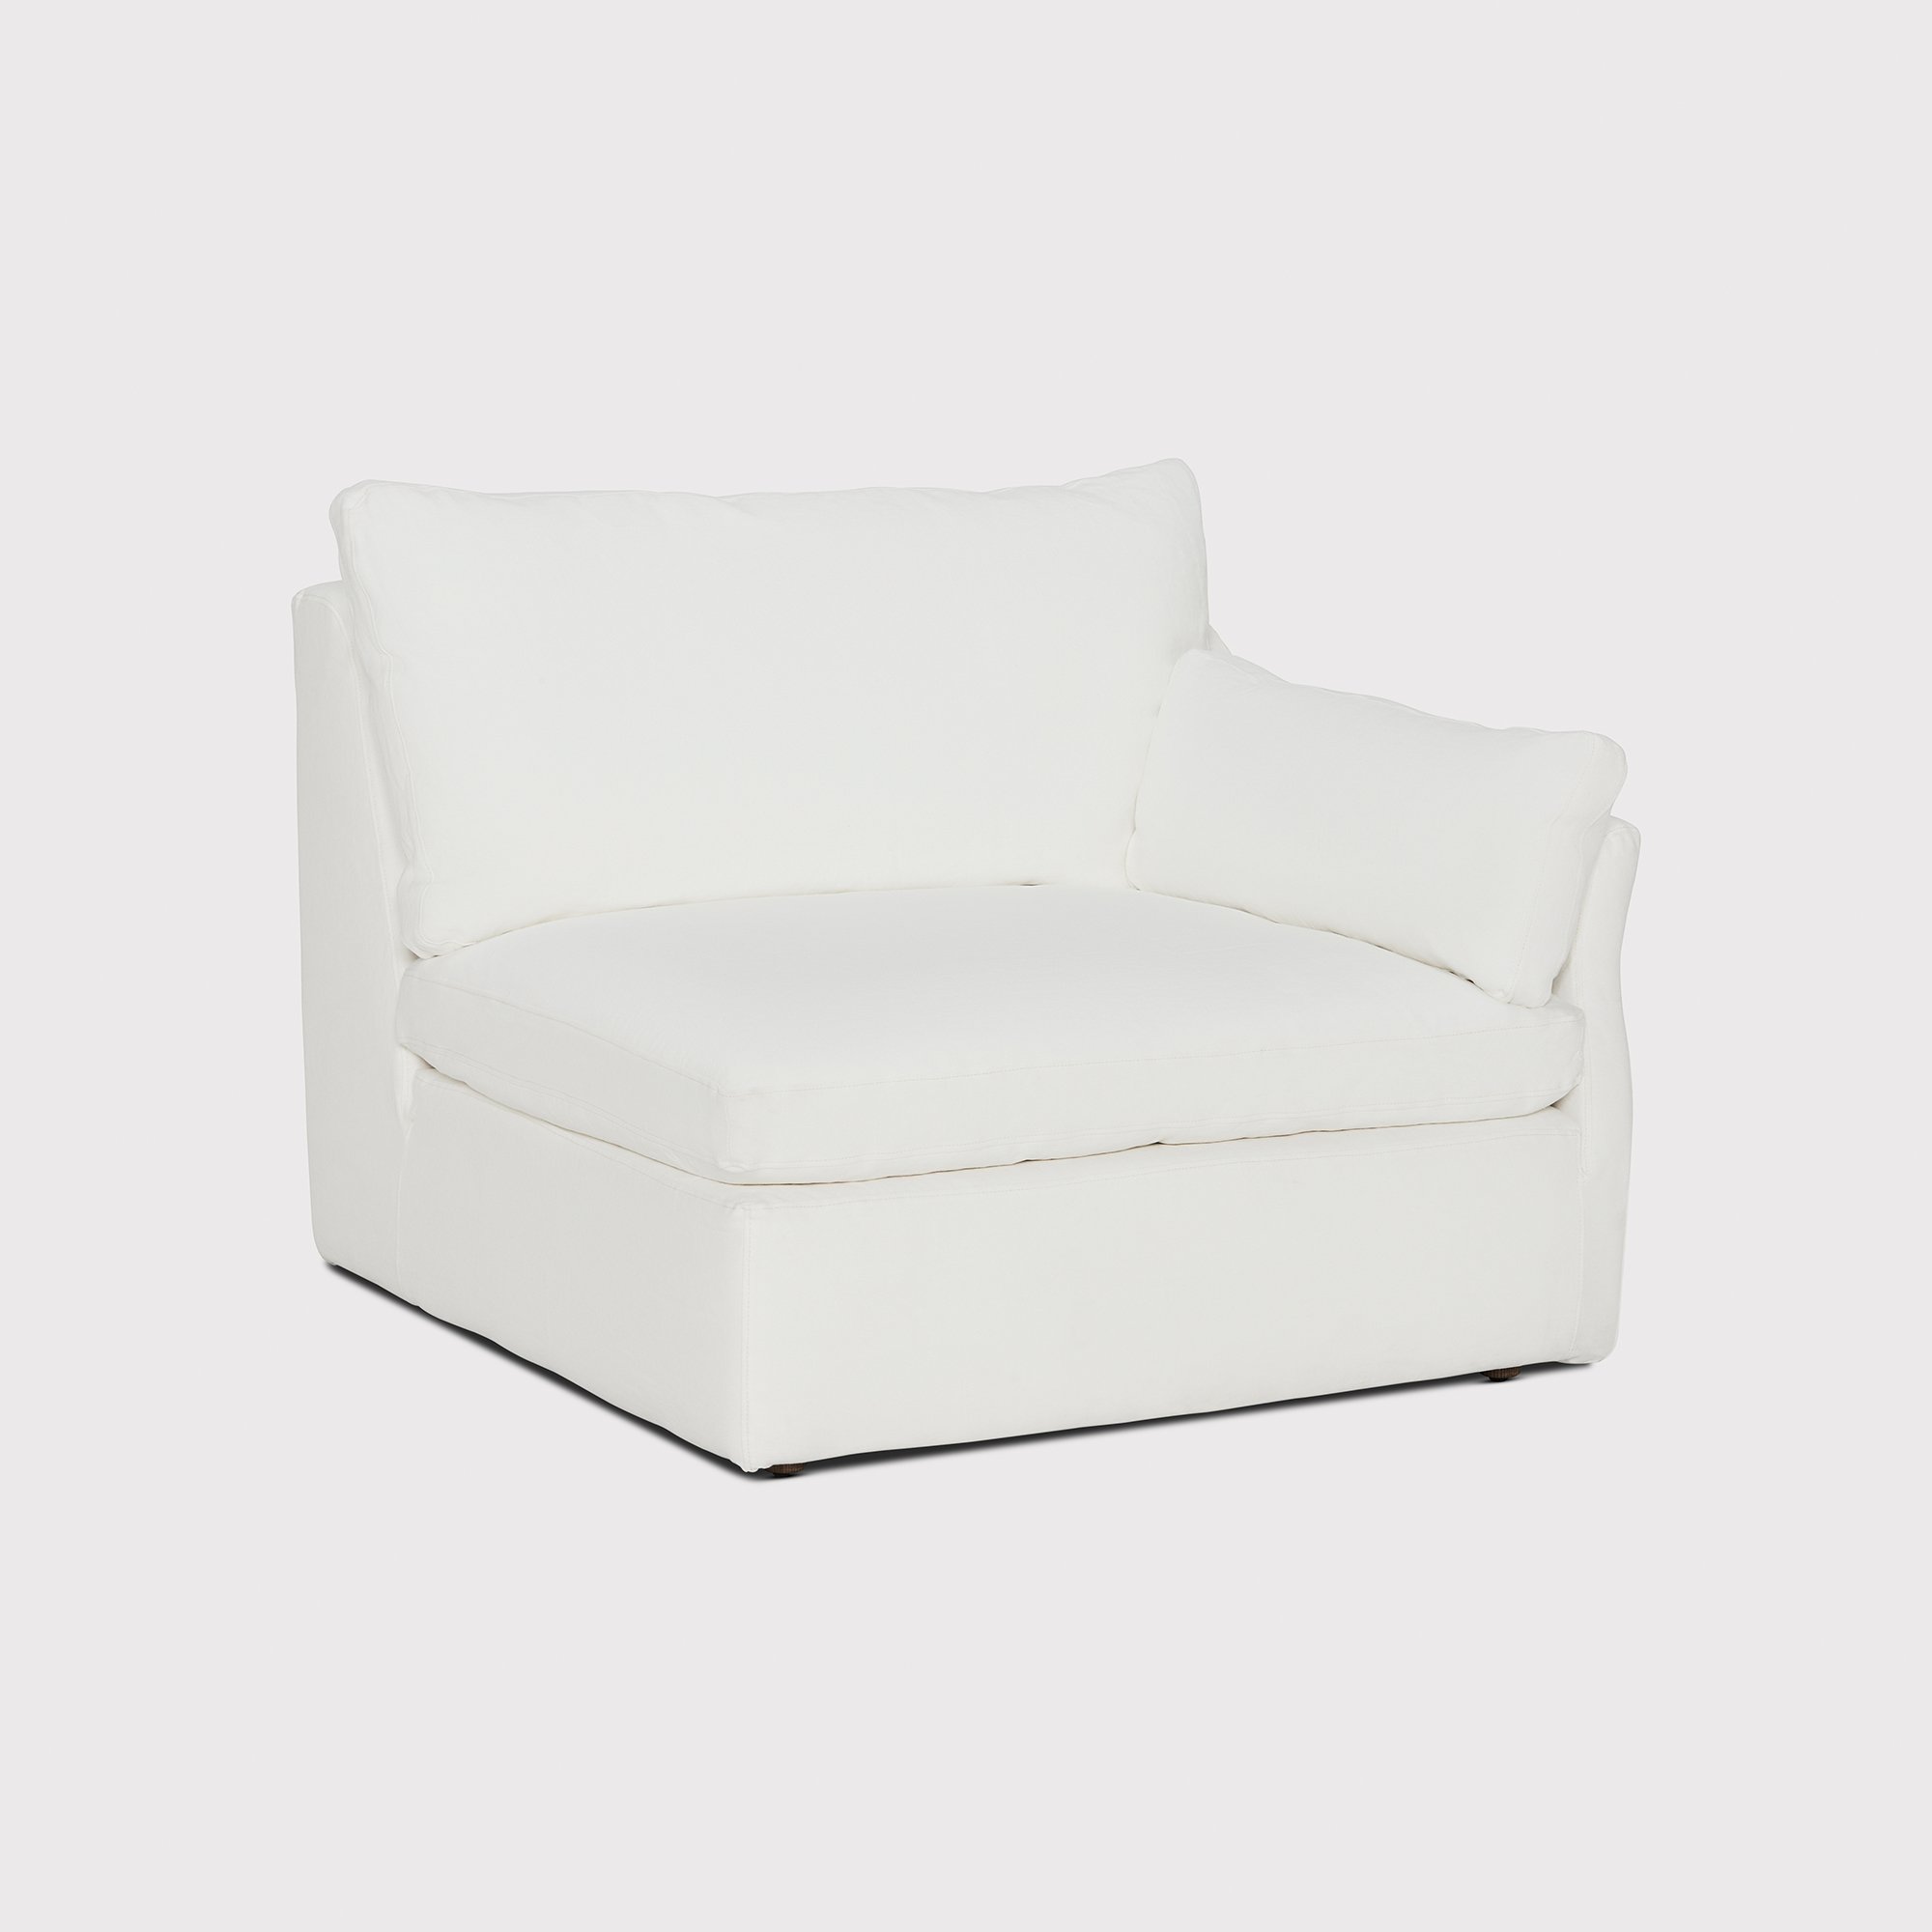 Timothy Oulton Oasis Sectional Corner Right Modular Sofa, White Fabric | Barker & Stonehouse